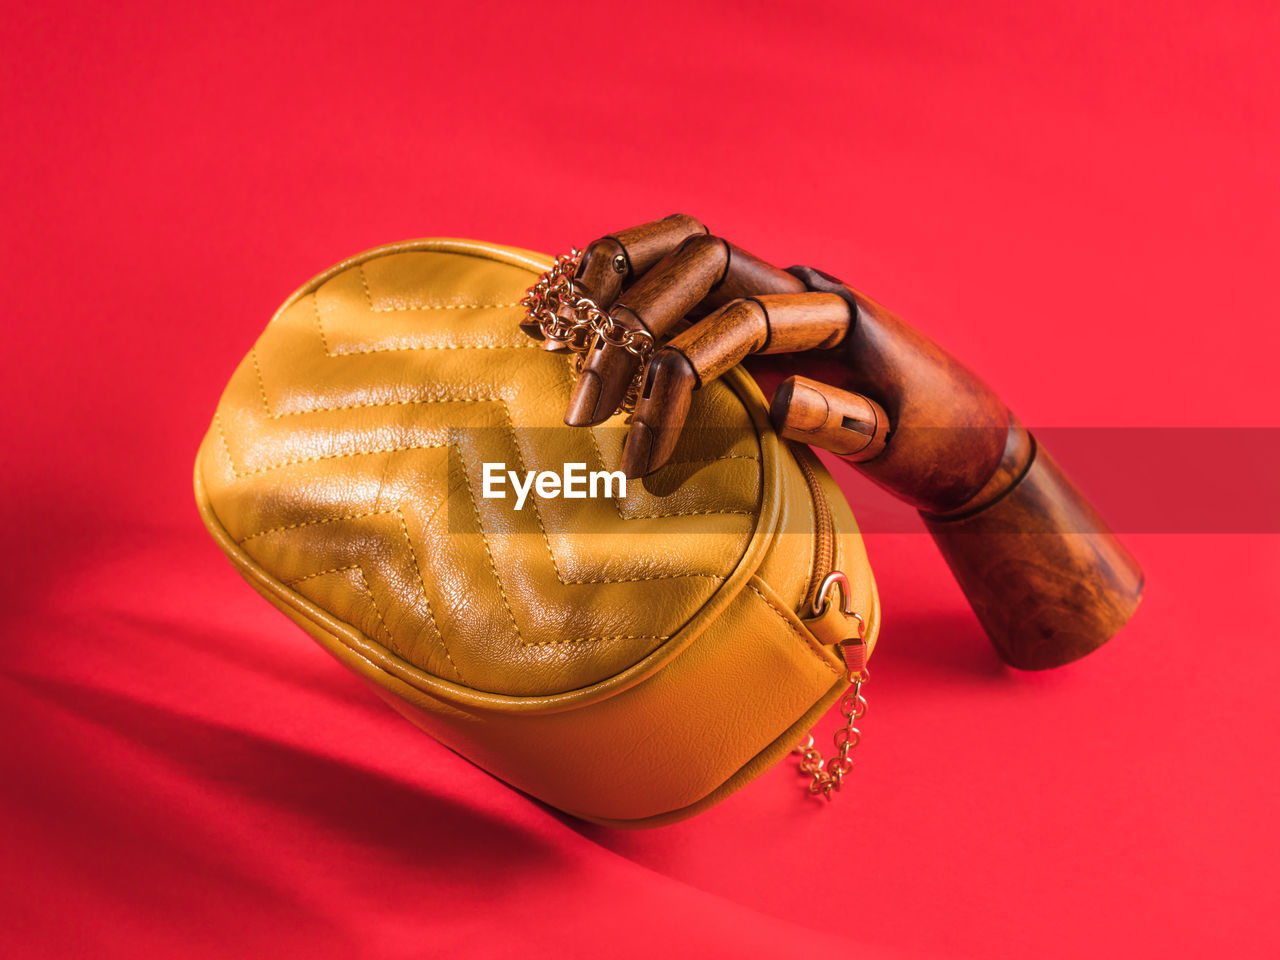 Wooden hand holding yellow eco leather bag on red background. female fashion accessories